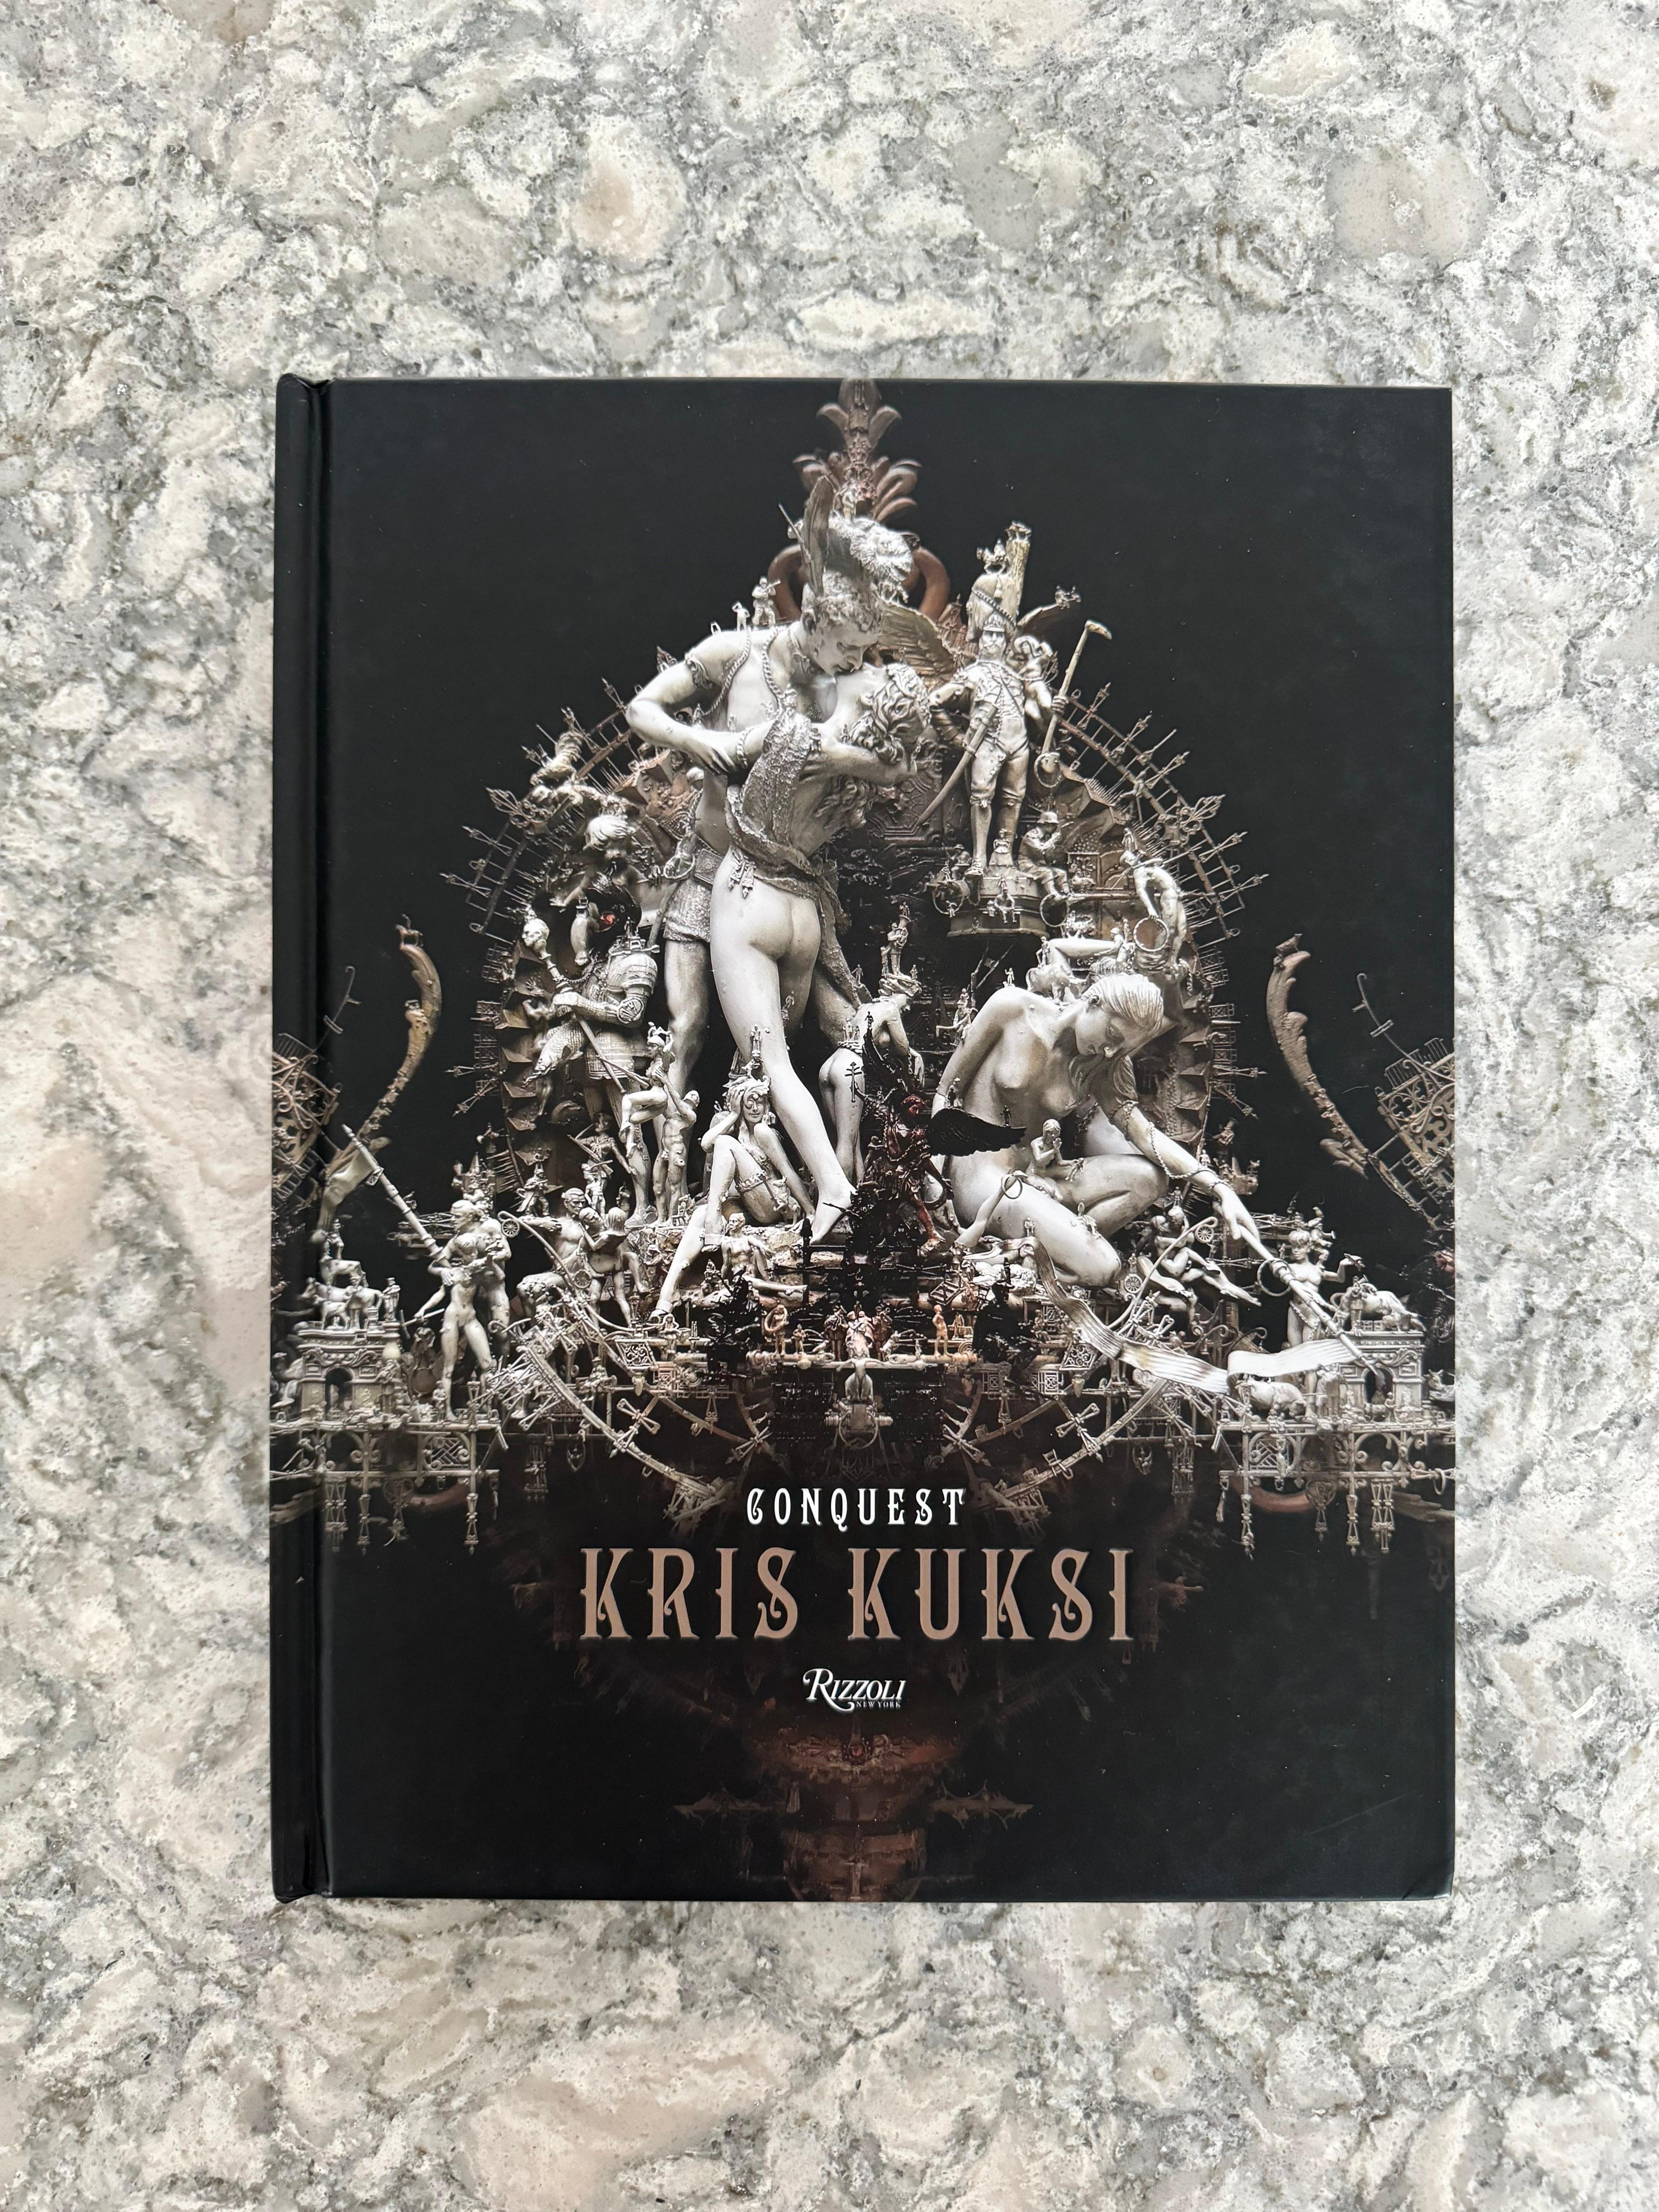 Conquest by Kris Kuksi - Signed Hardcover Edition

Book Description:
Immerse yourself in the captivating world of "Conquest" by Kris Kuksi, a stunning and evocative visual journey that transcends the boundaries of art. This limited signed hardcover